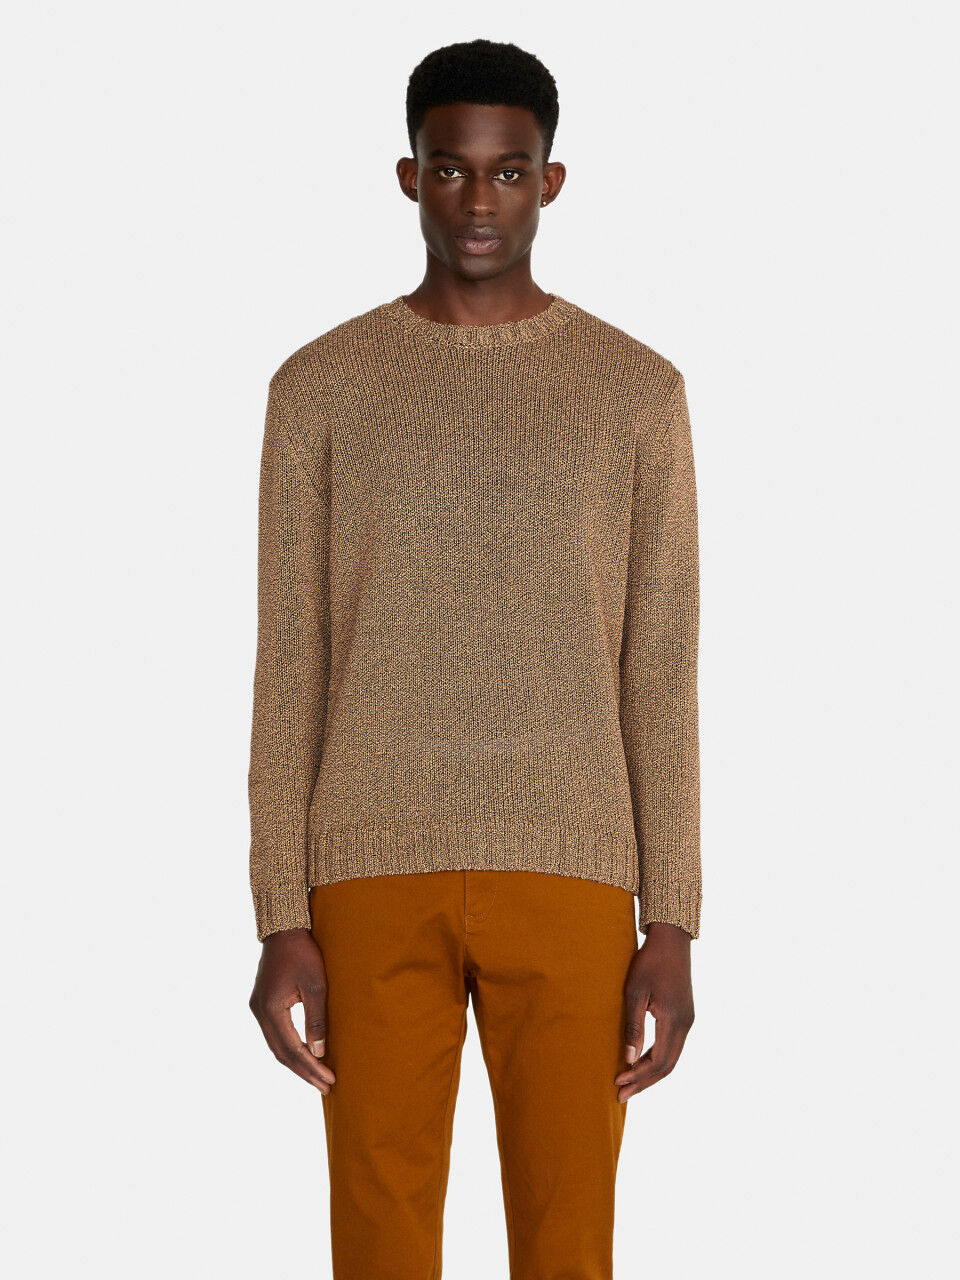 Relaxed fit crew neck sweater